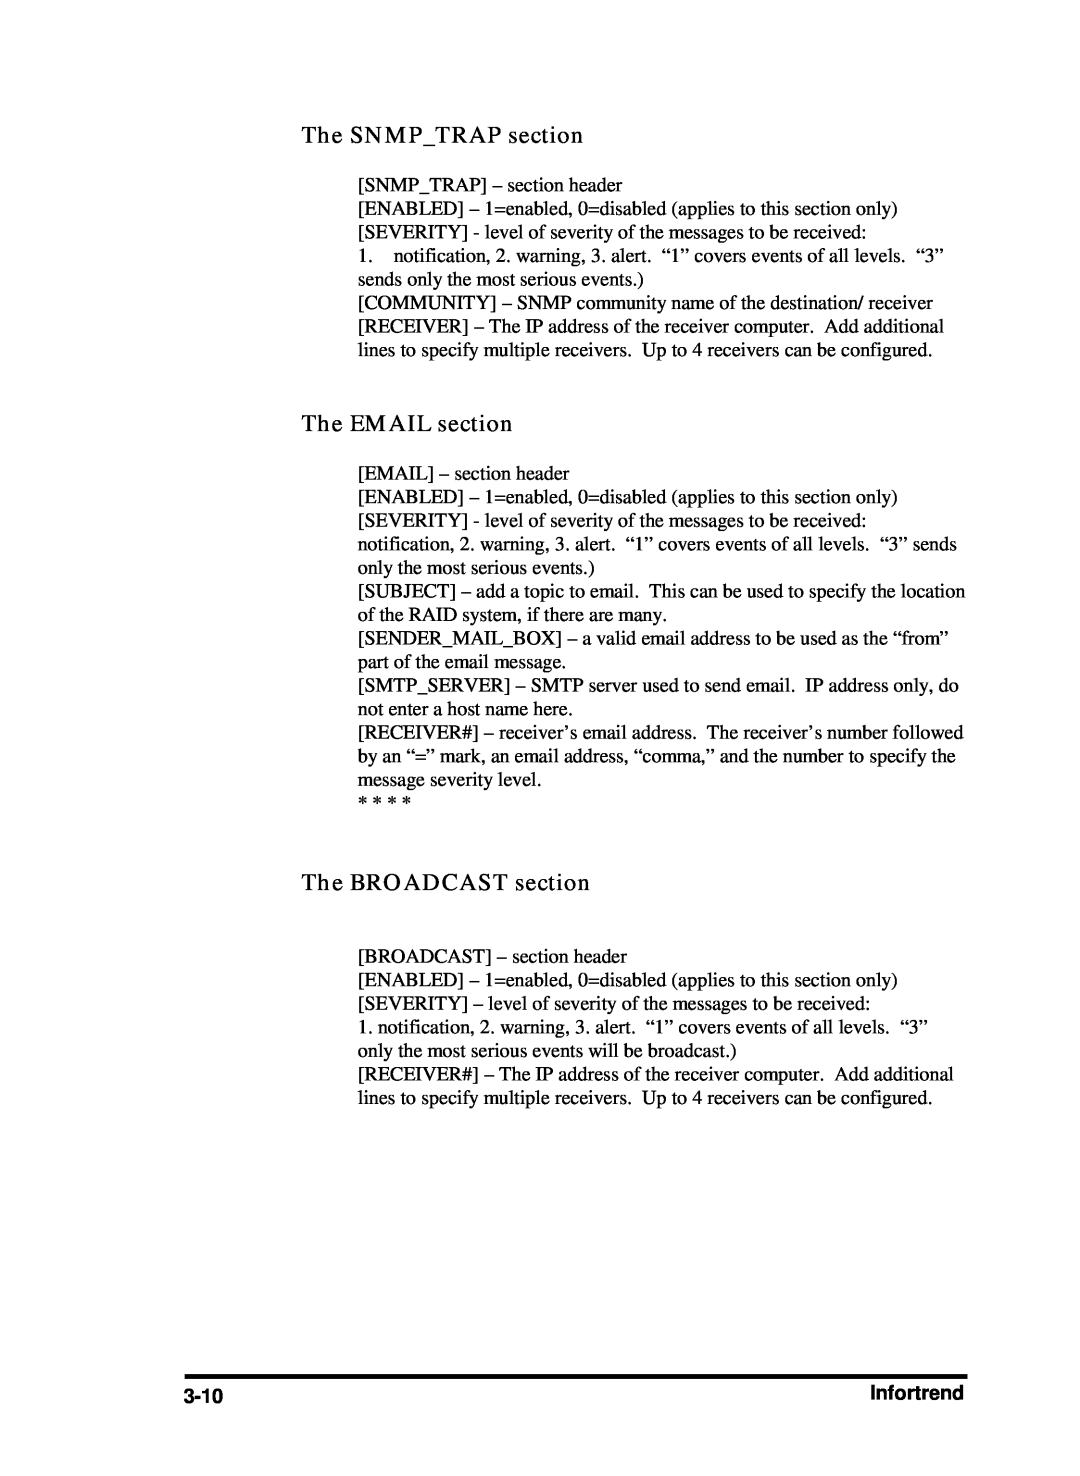 Compaq Infortrend manual The SNMPTRAP section, The EMAIL section, The BROADCAST section, 3-10 